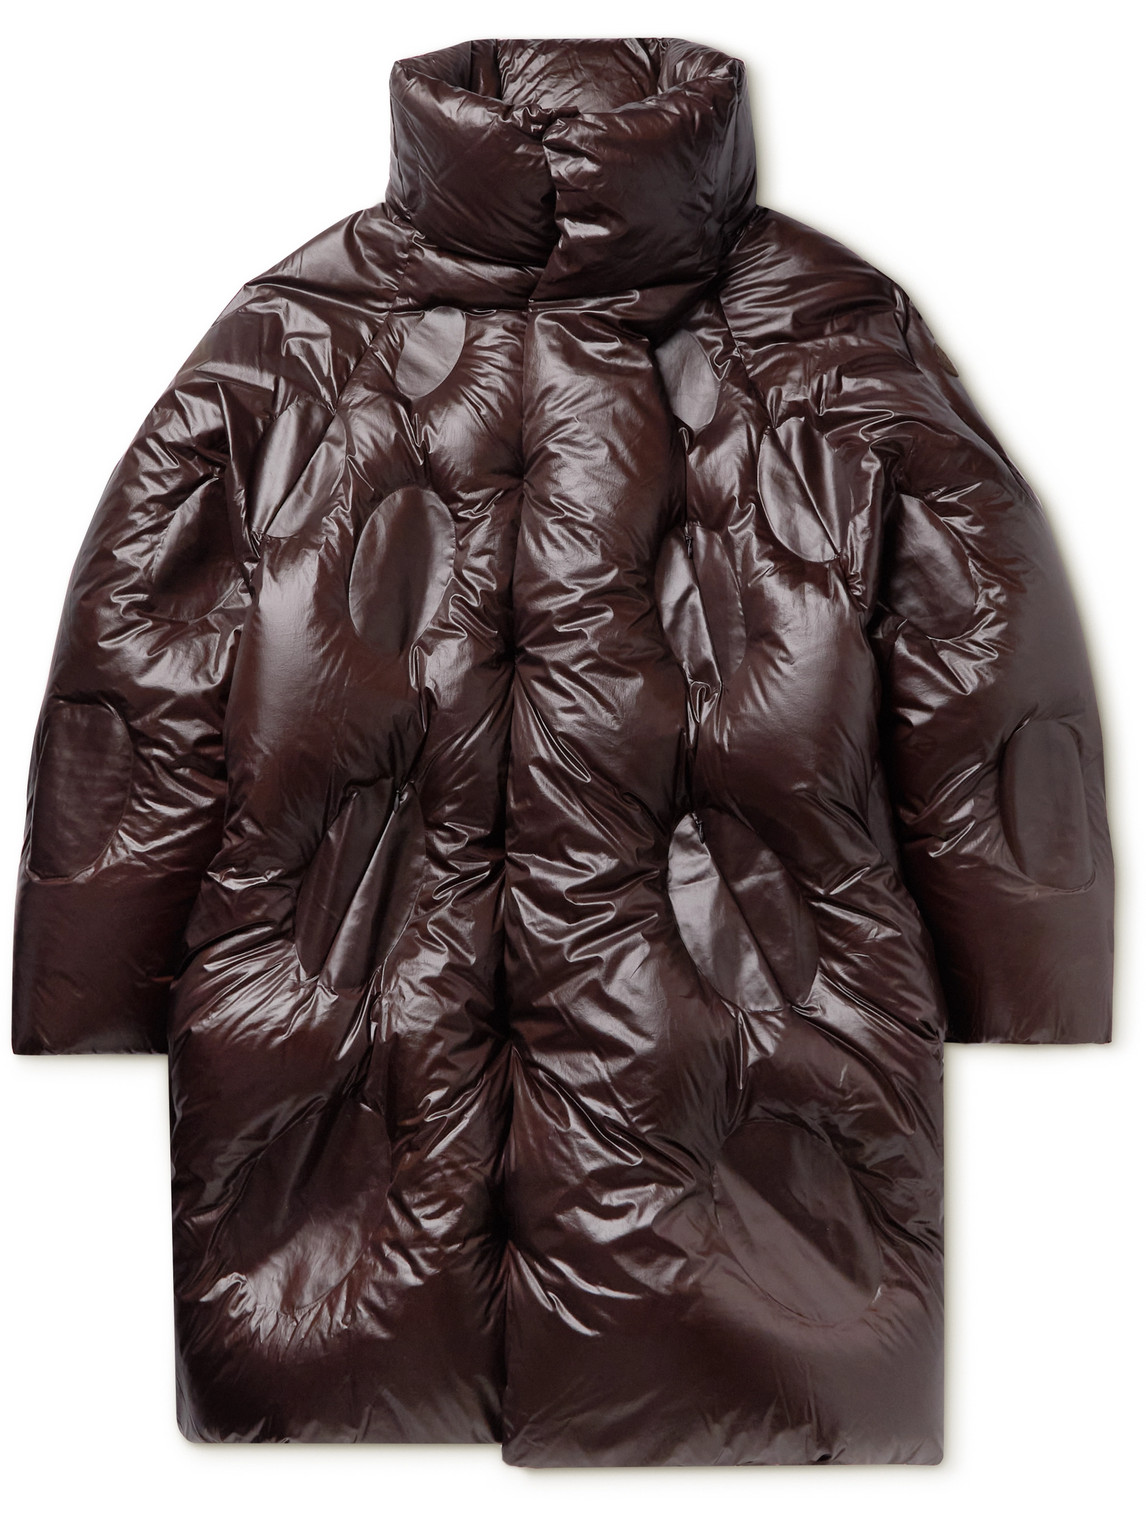 Moncler Genius - Dingyun Zhang Iaphia Oversized Quilted Glossed-Shell Hooded Down Coat - Men - Brown - 00 von Moncler Genius